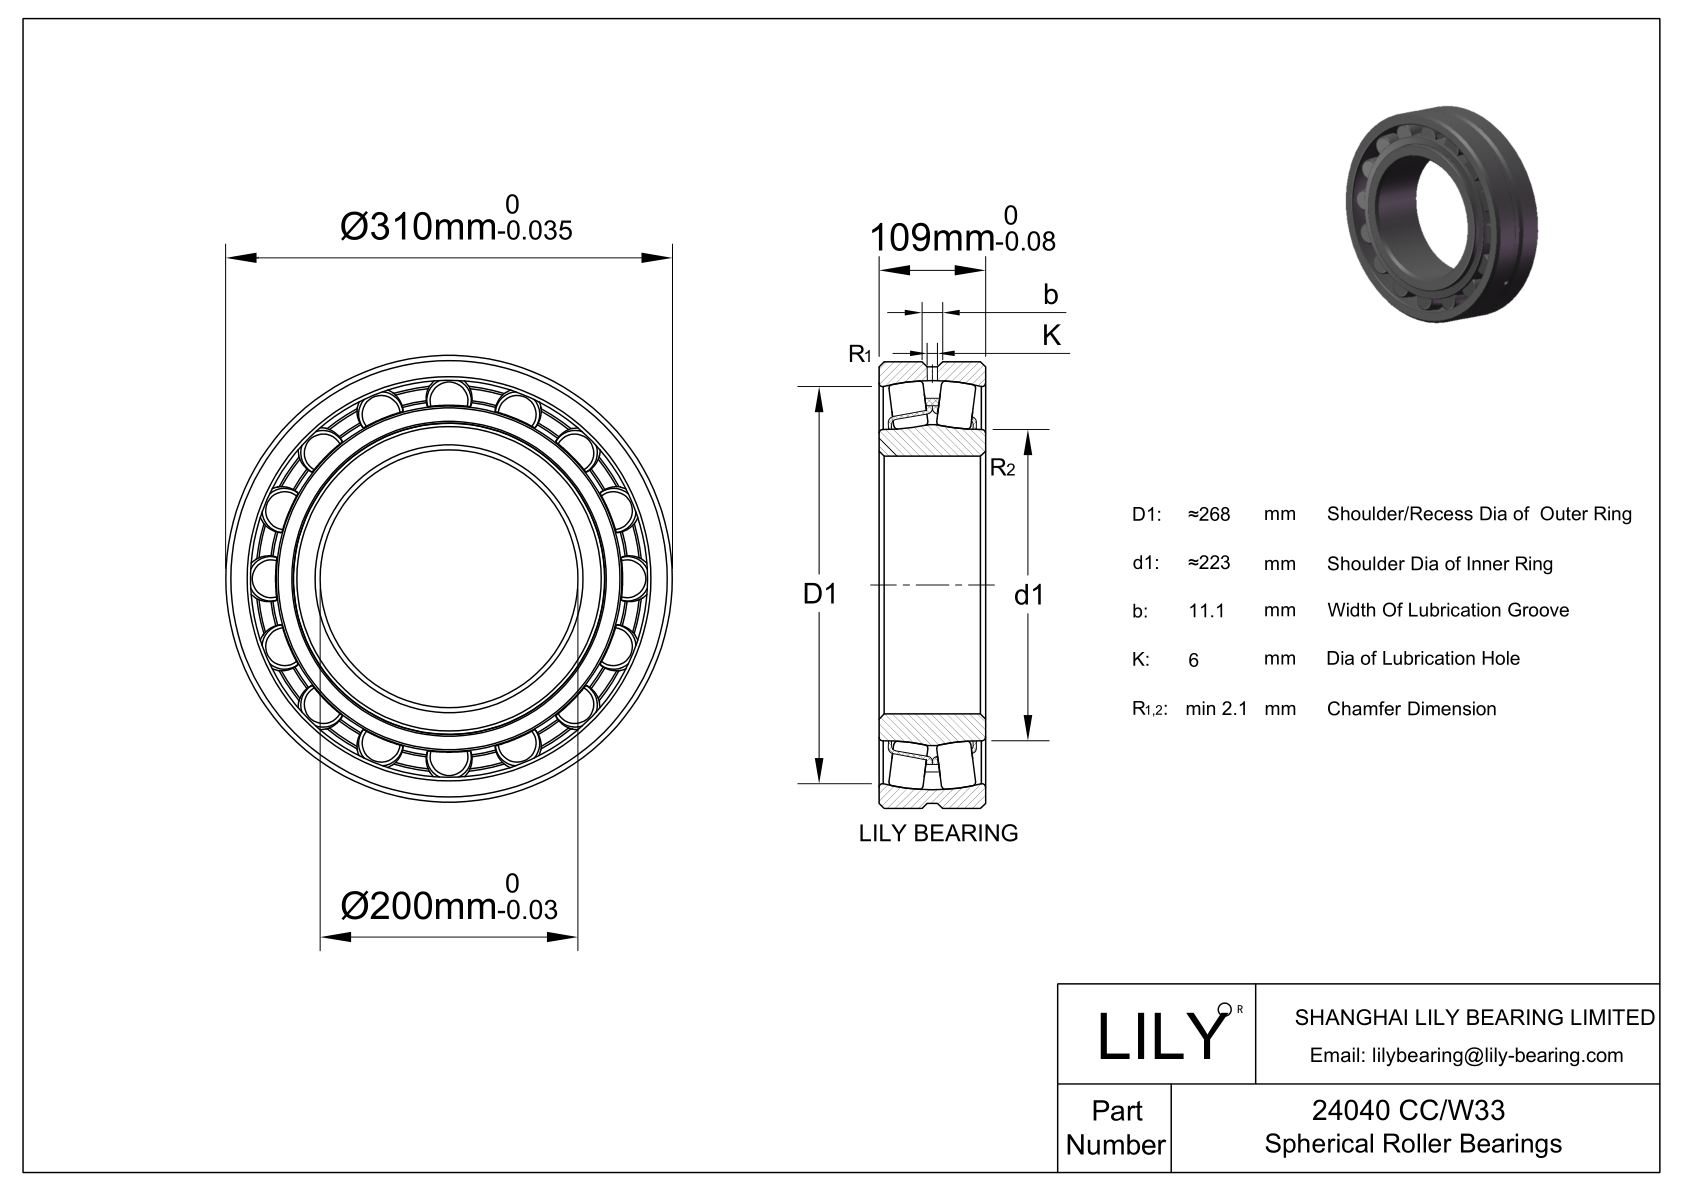 24040 CC/W33 Double Row Spherical Roller Bearing cad drawing